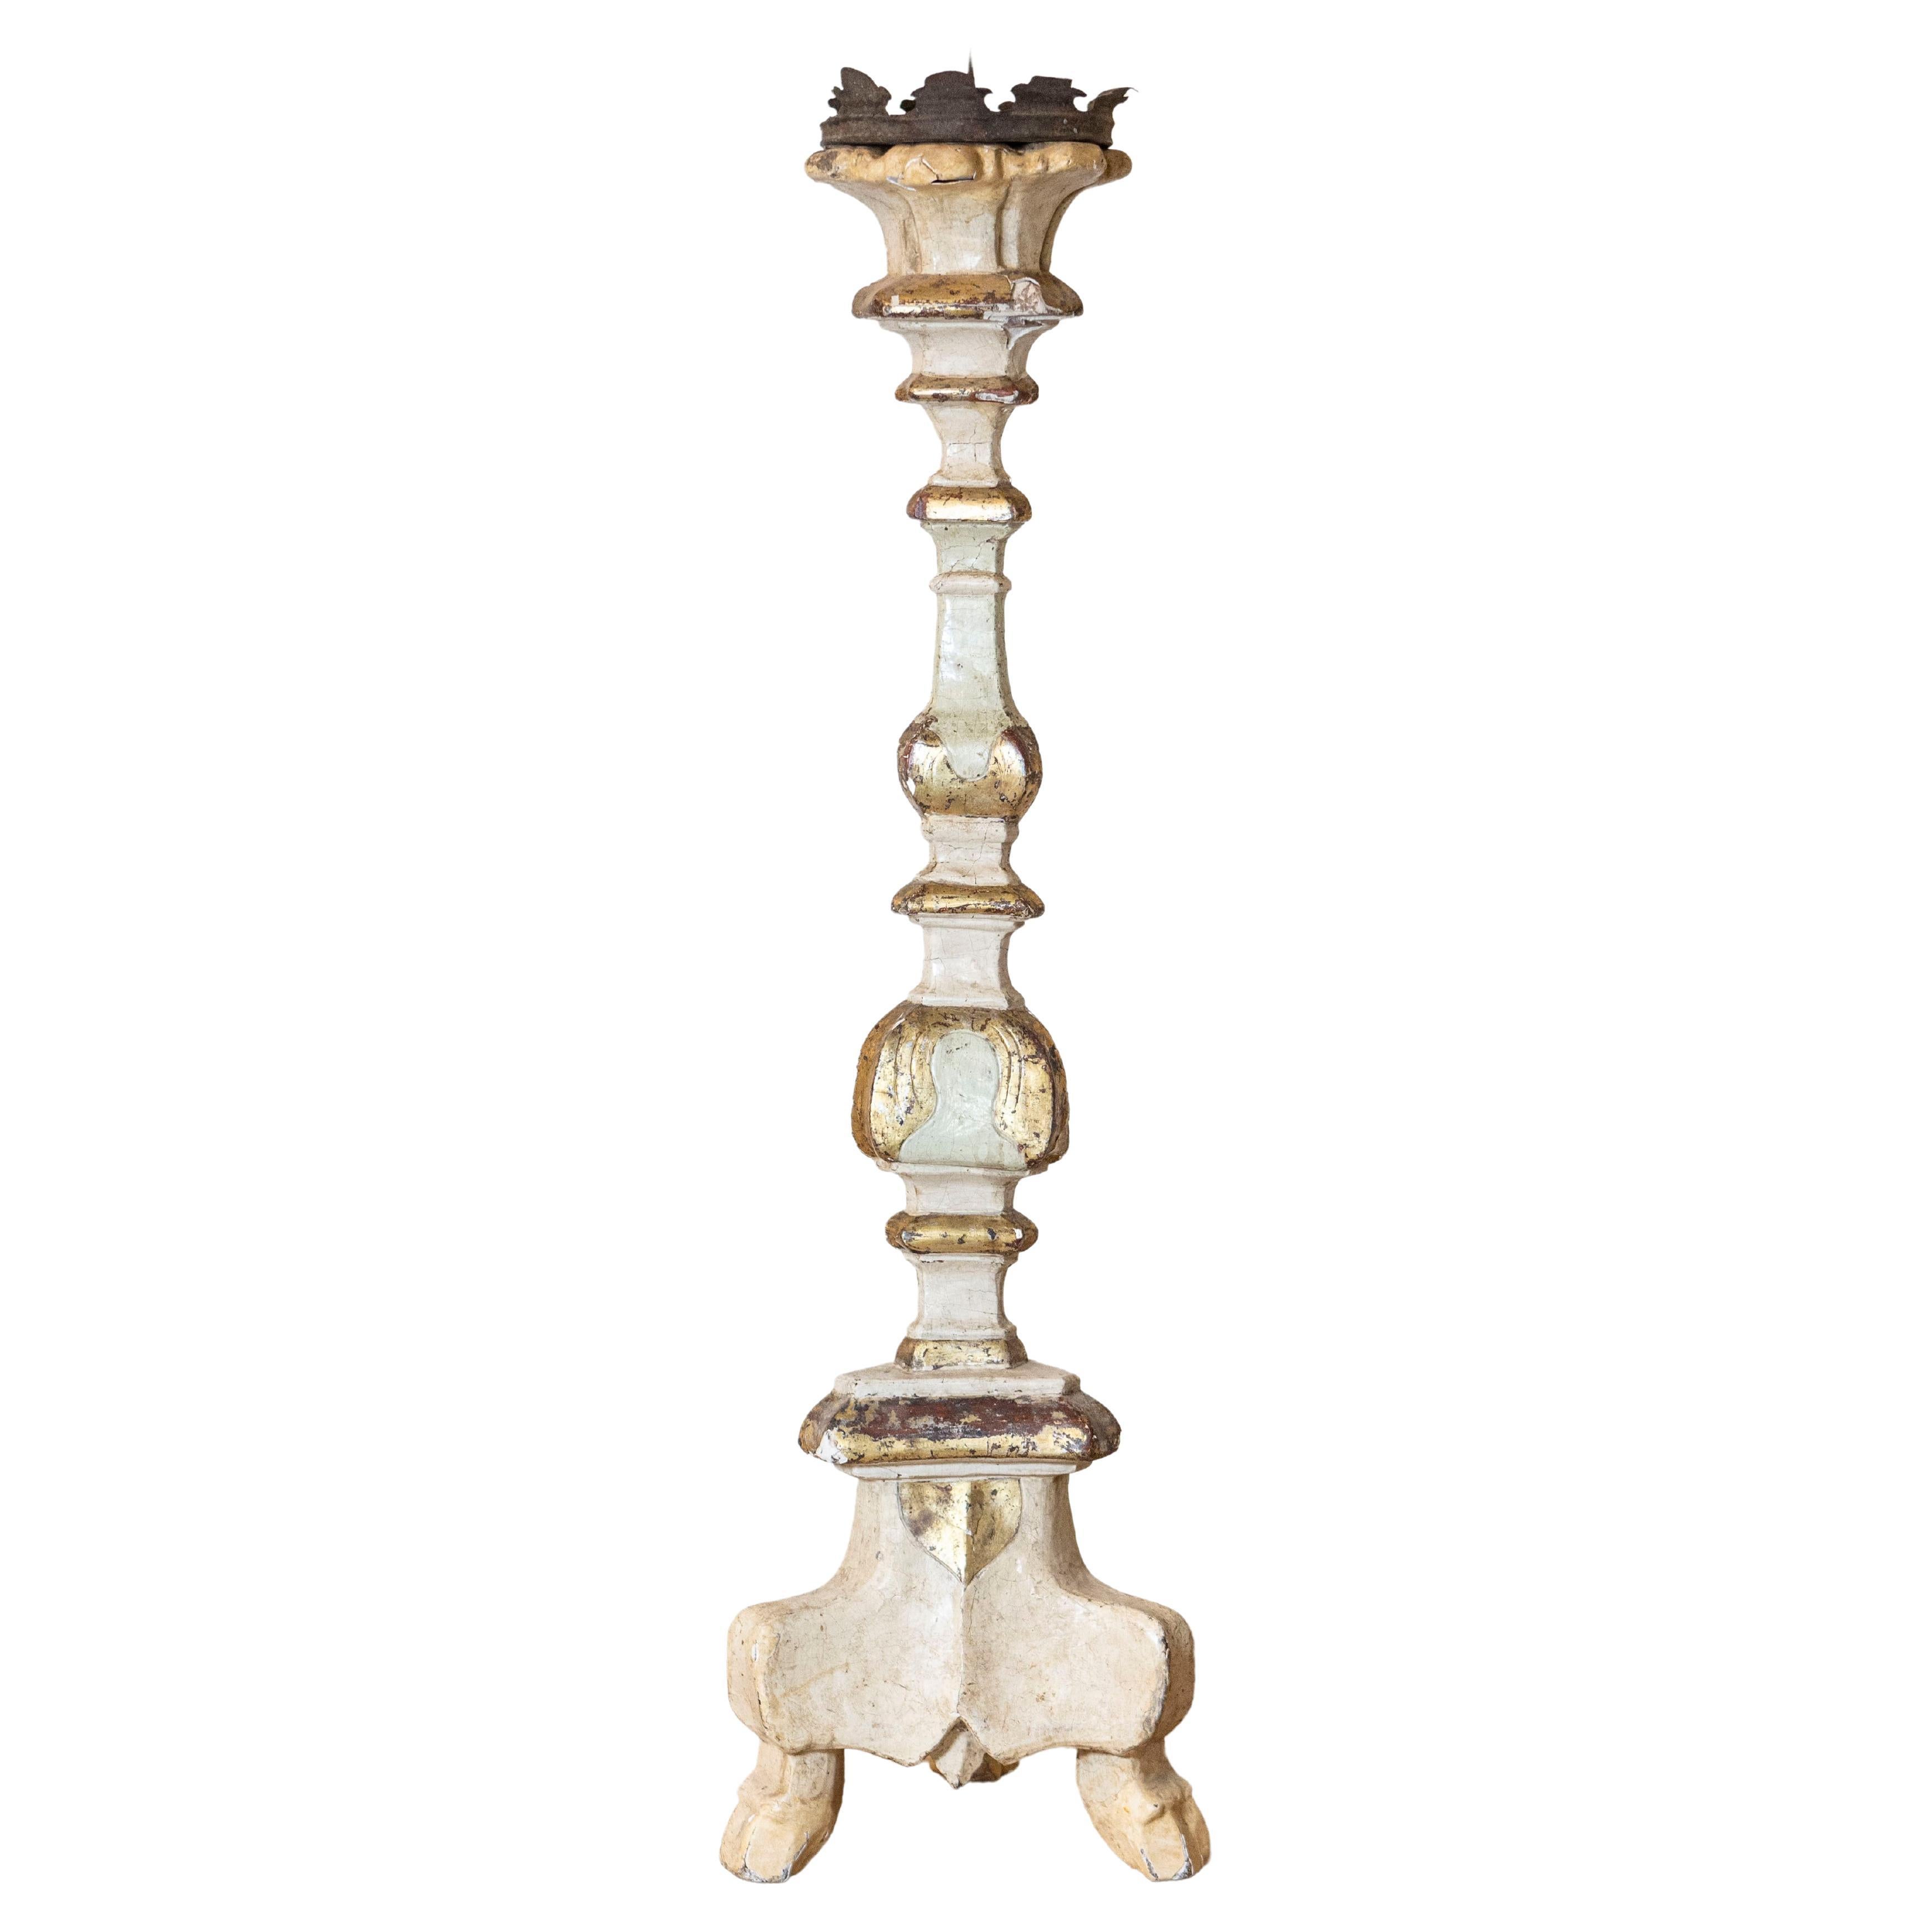 Italian 18th Century Painted Wood Candlestick from Tuscany with Gilt Accents